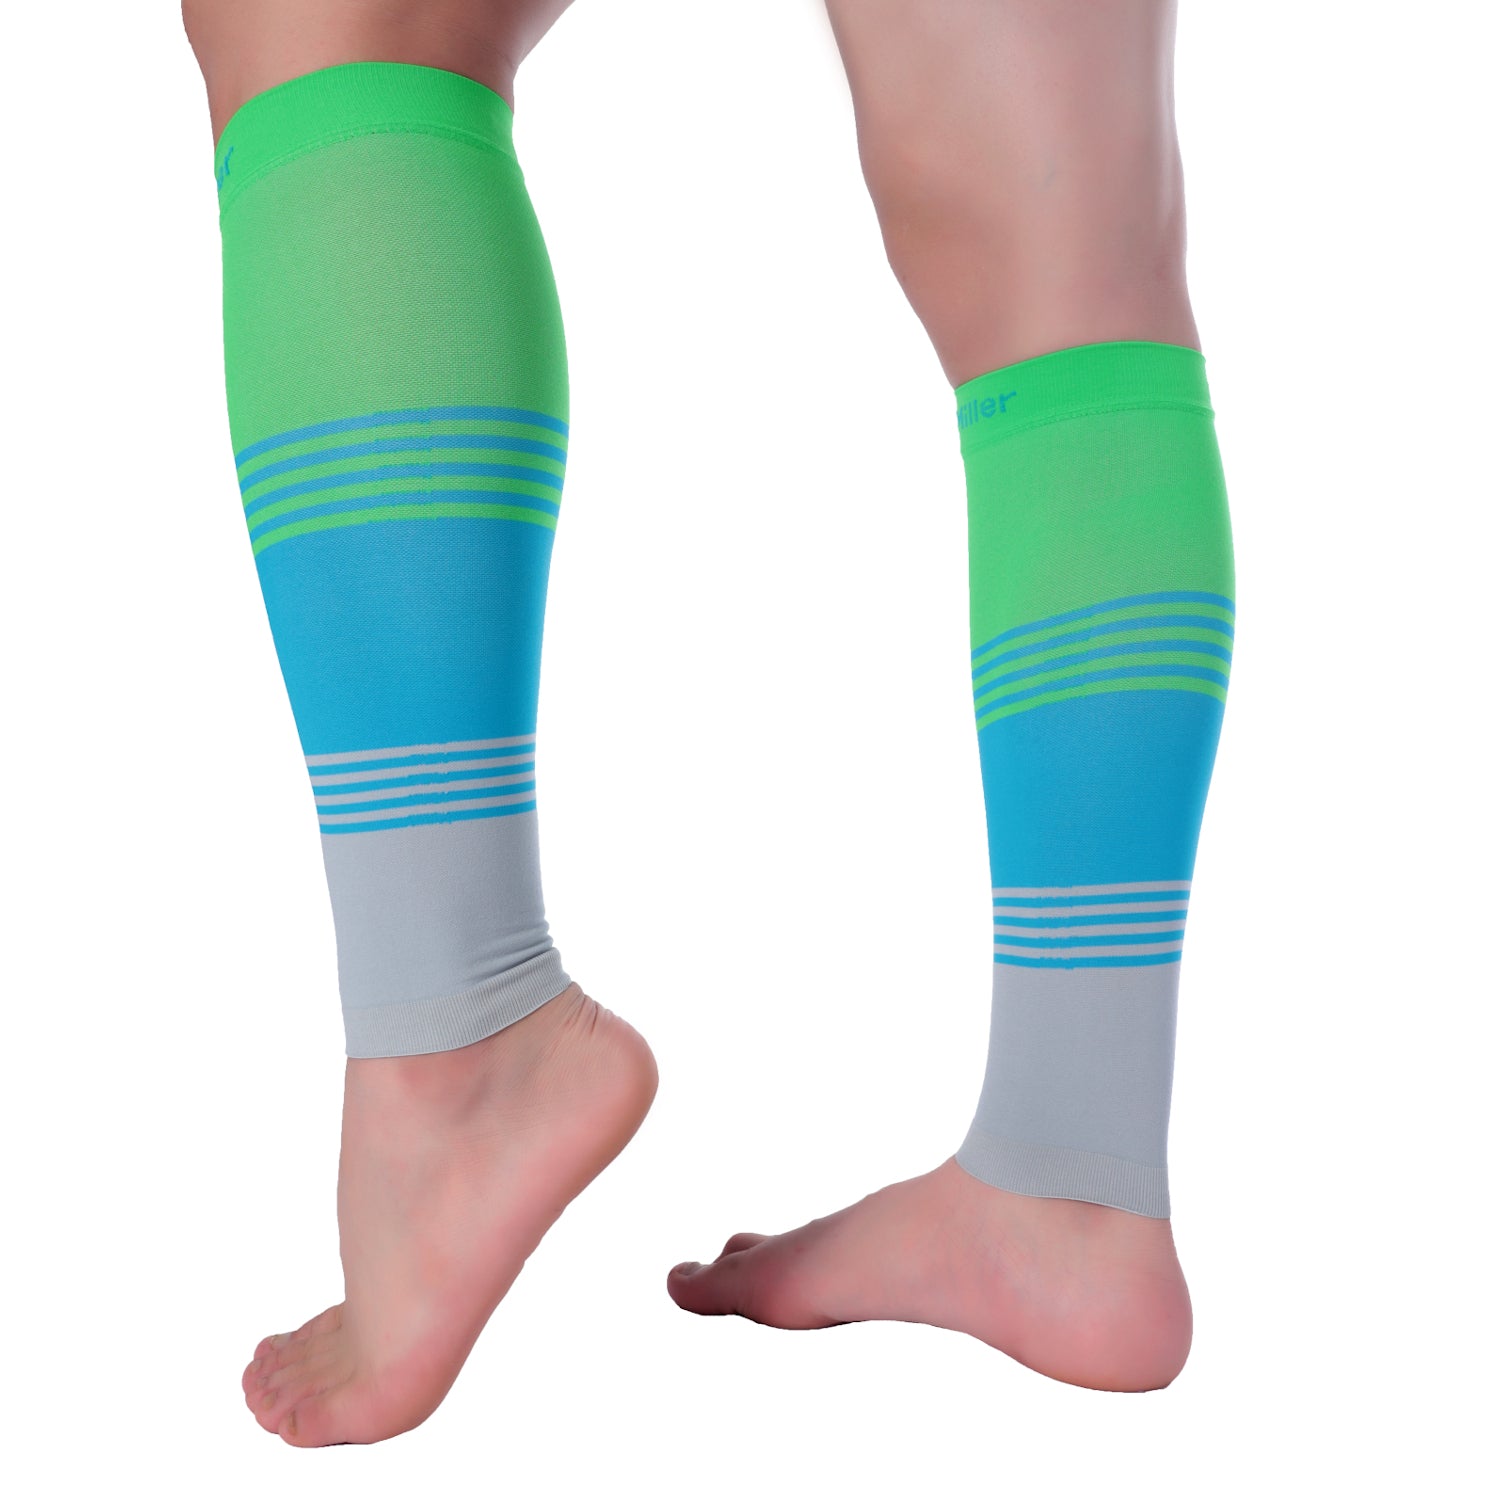 Premium Calf Compression Sleeve 20-30 mmHg GREEN/BLUE/GRAY by Doc Mill ...